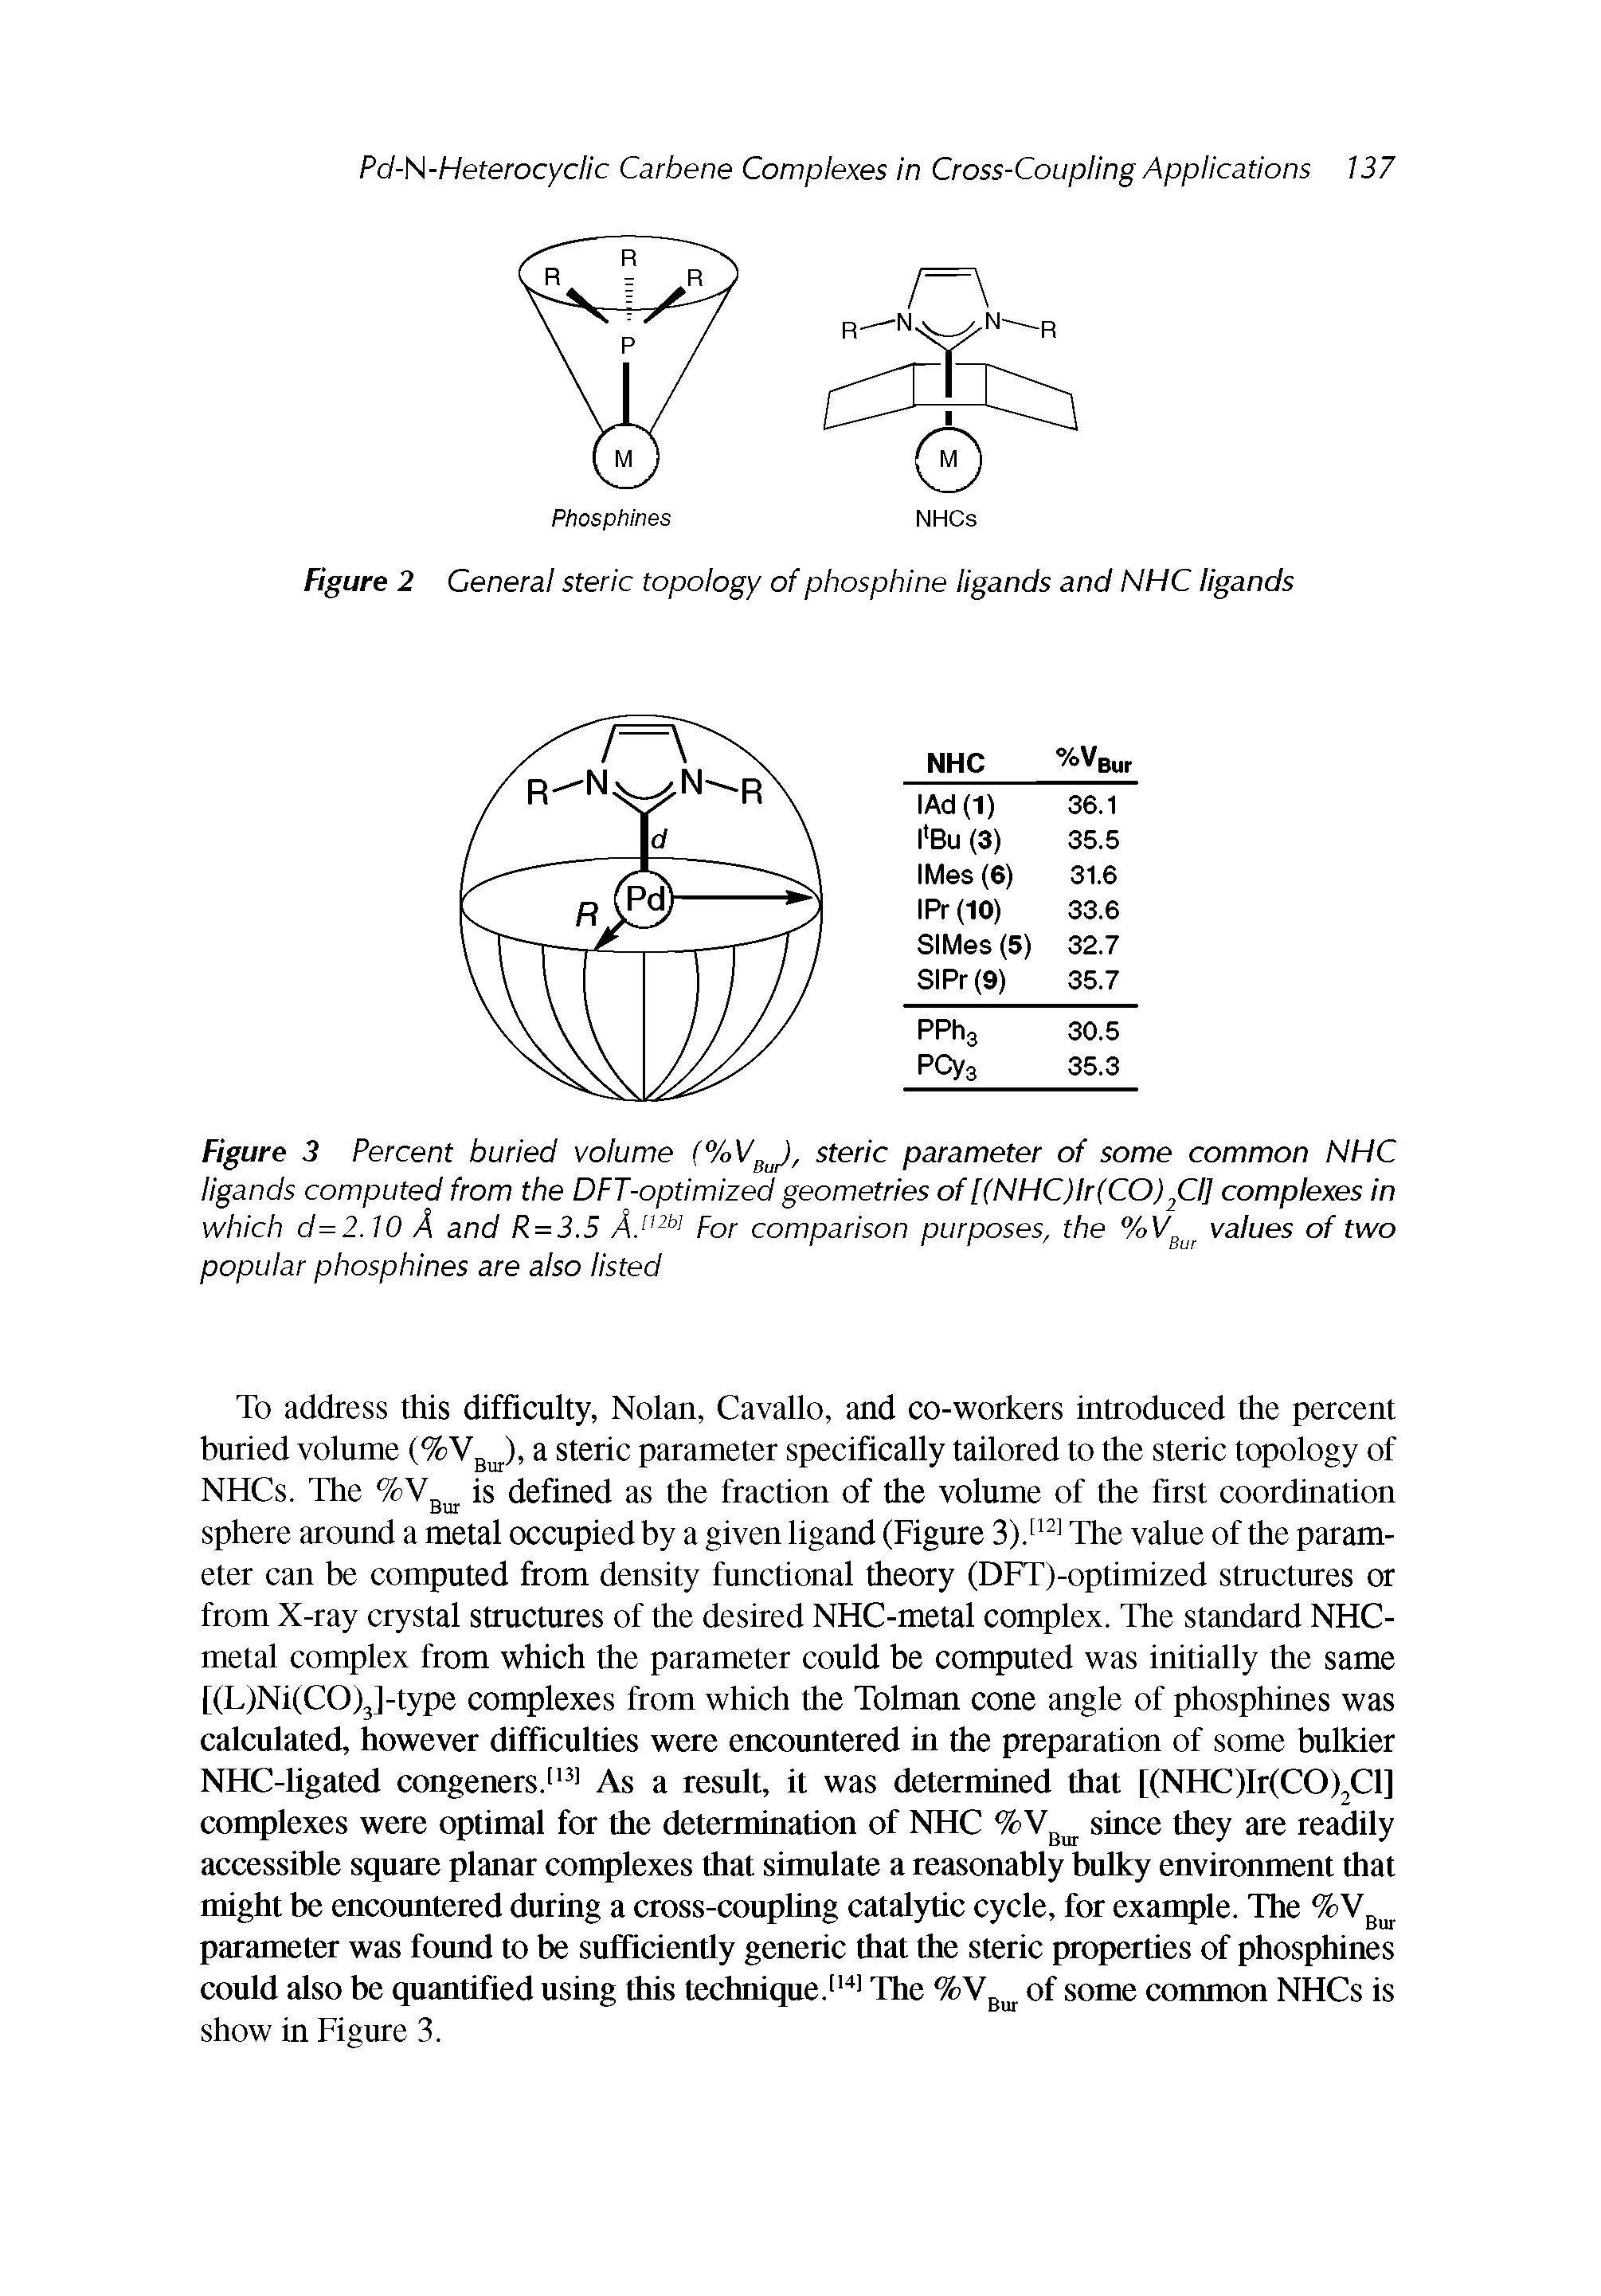 Figure 3 Percent buried volume (%VgJ, steric parameter of some common NHC ligands computed from the DFT-optimized geometries of [(NHC)lr(CO)fl] complexes in which d=2. iO A and R = 3.5 For comparison purposes, the values of two...